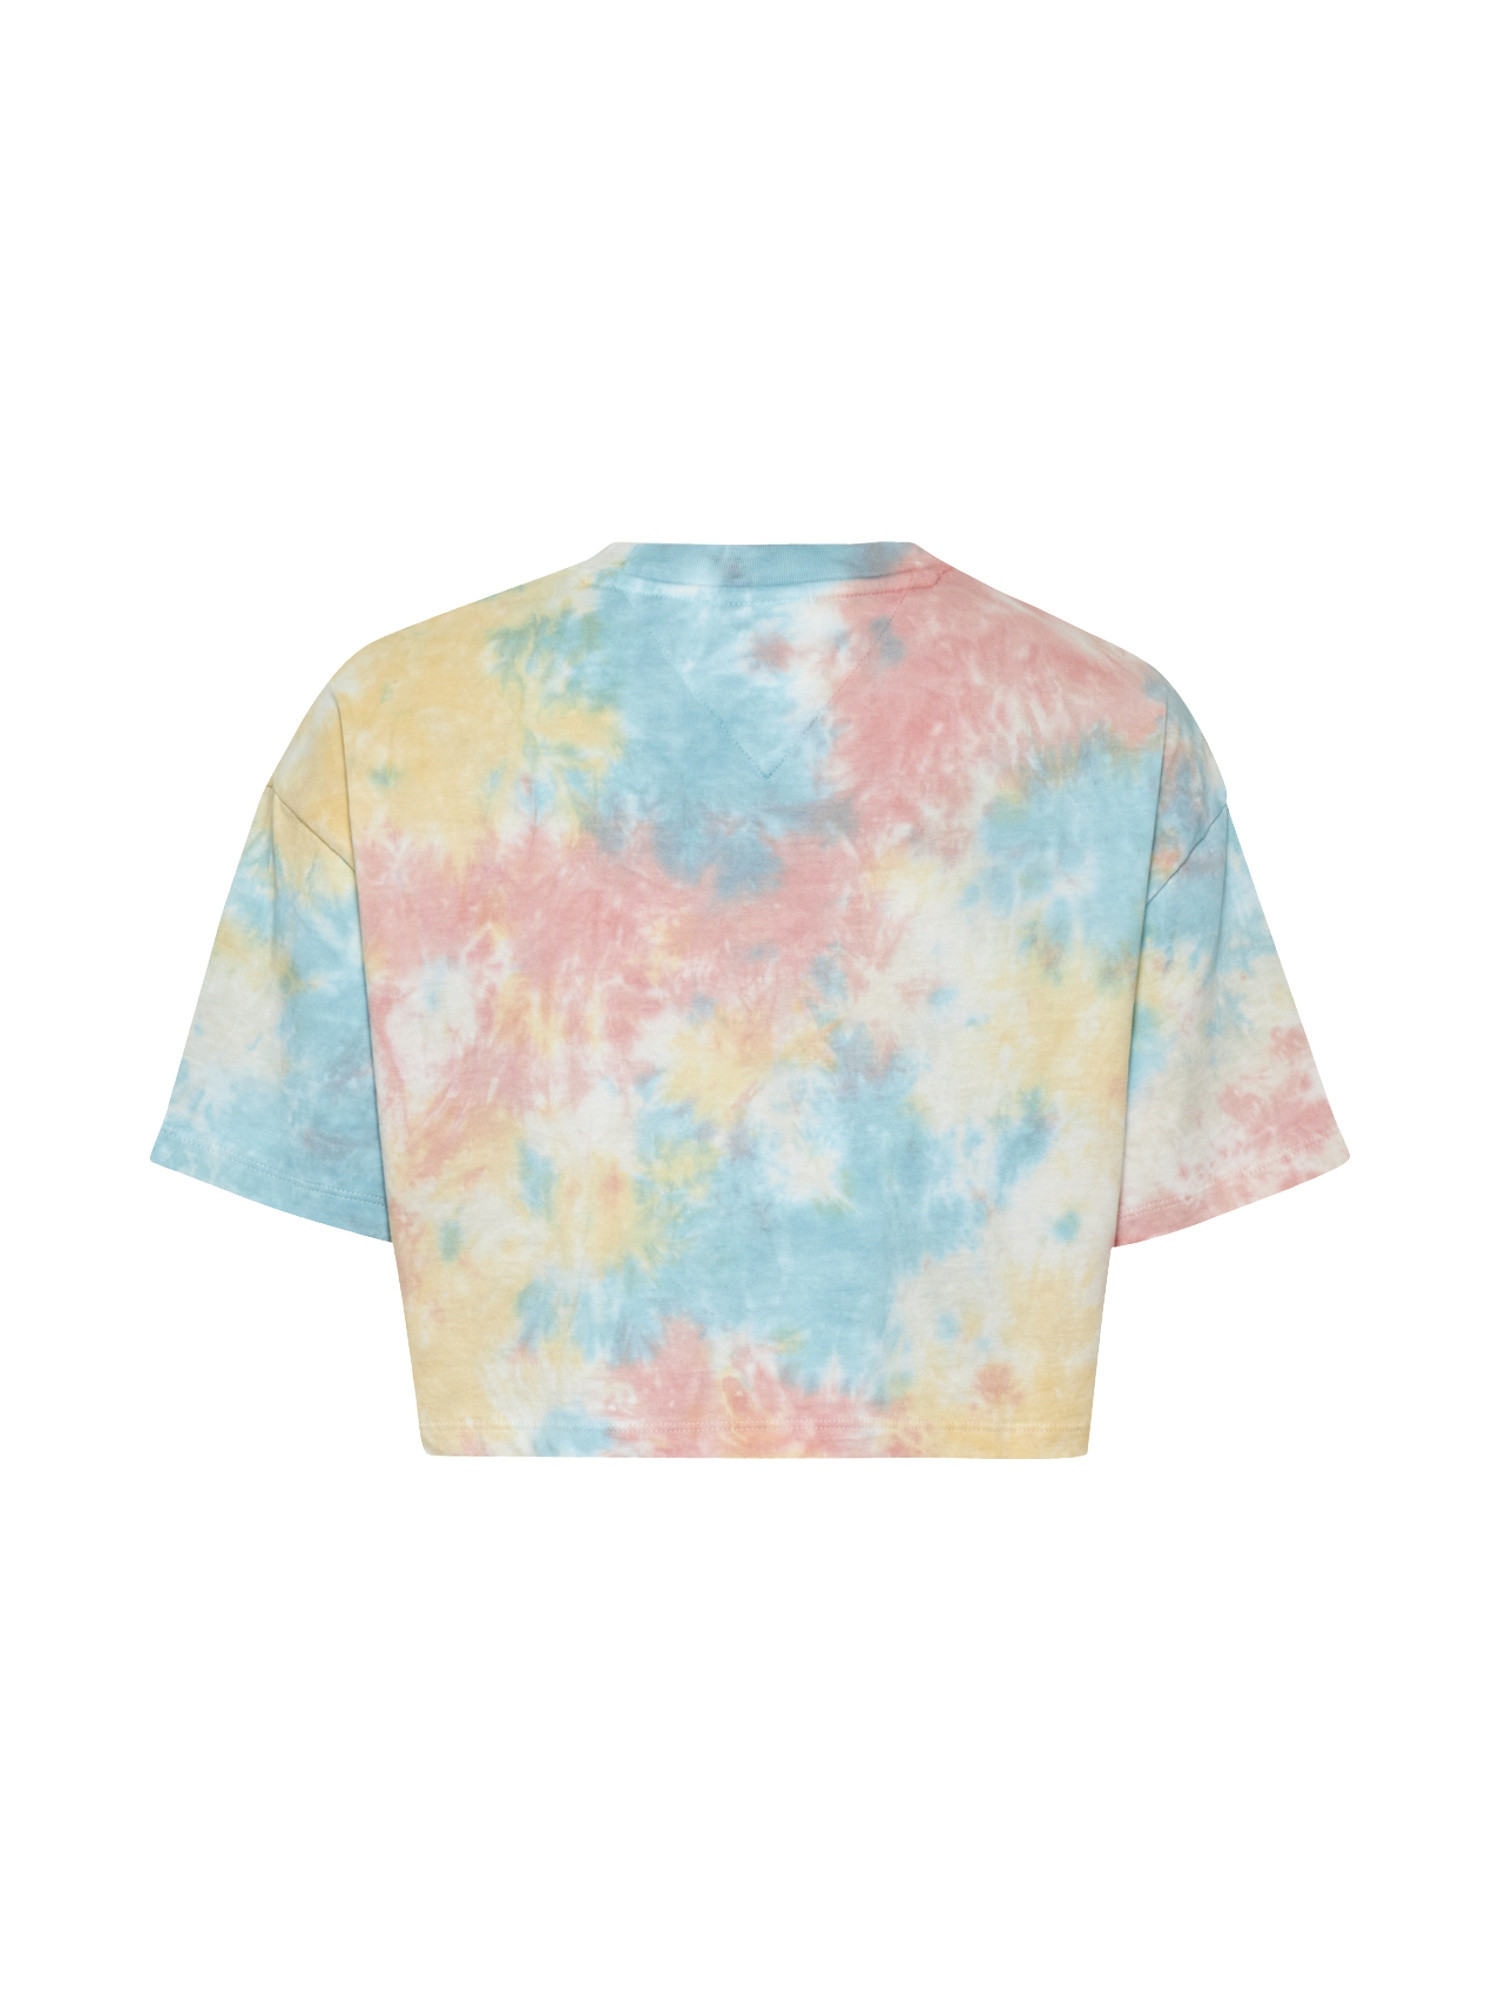 Cropped tie dye T-shirt, Multicolor, large image number 1